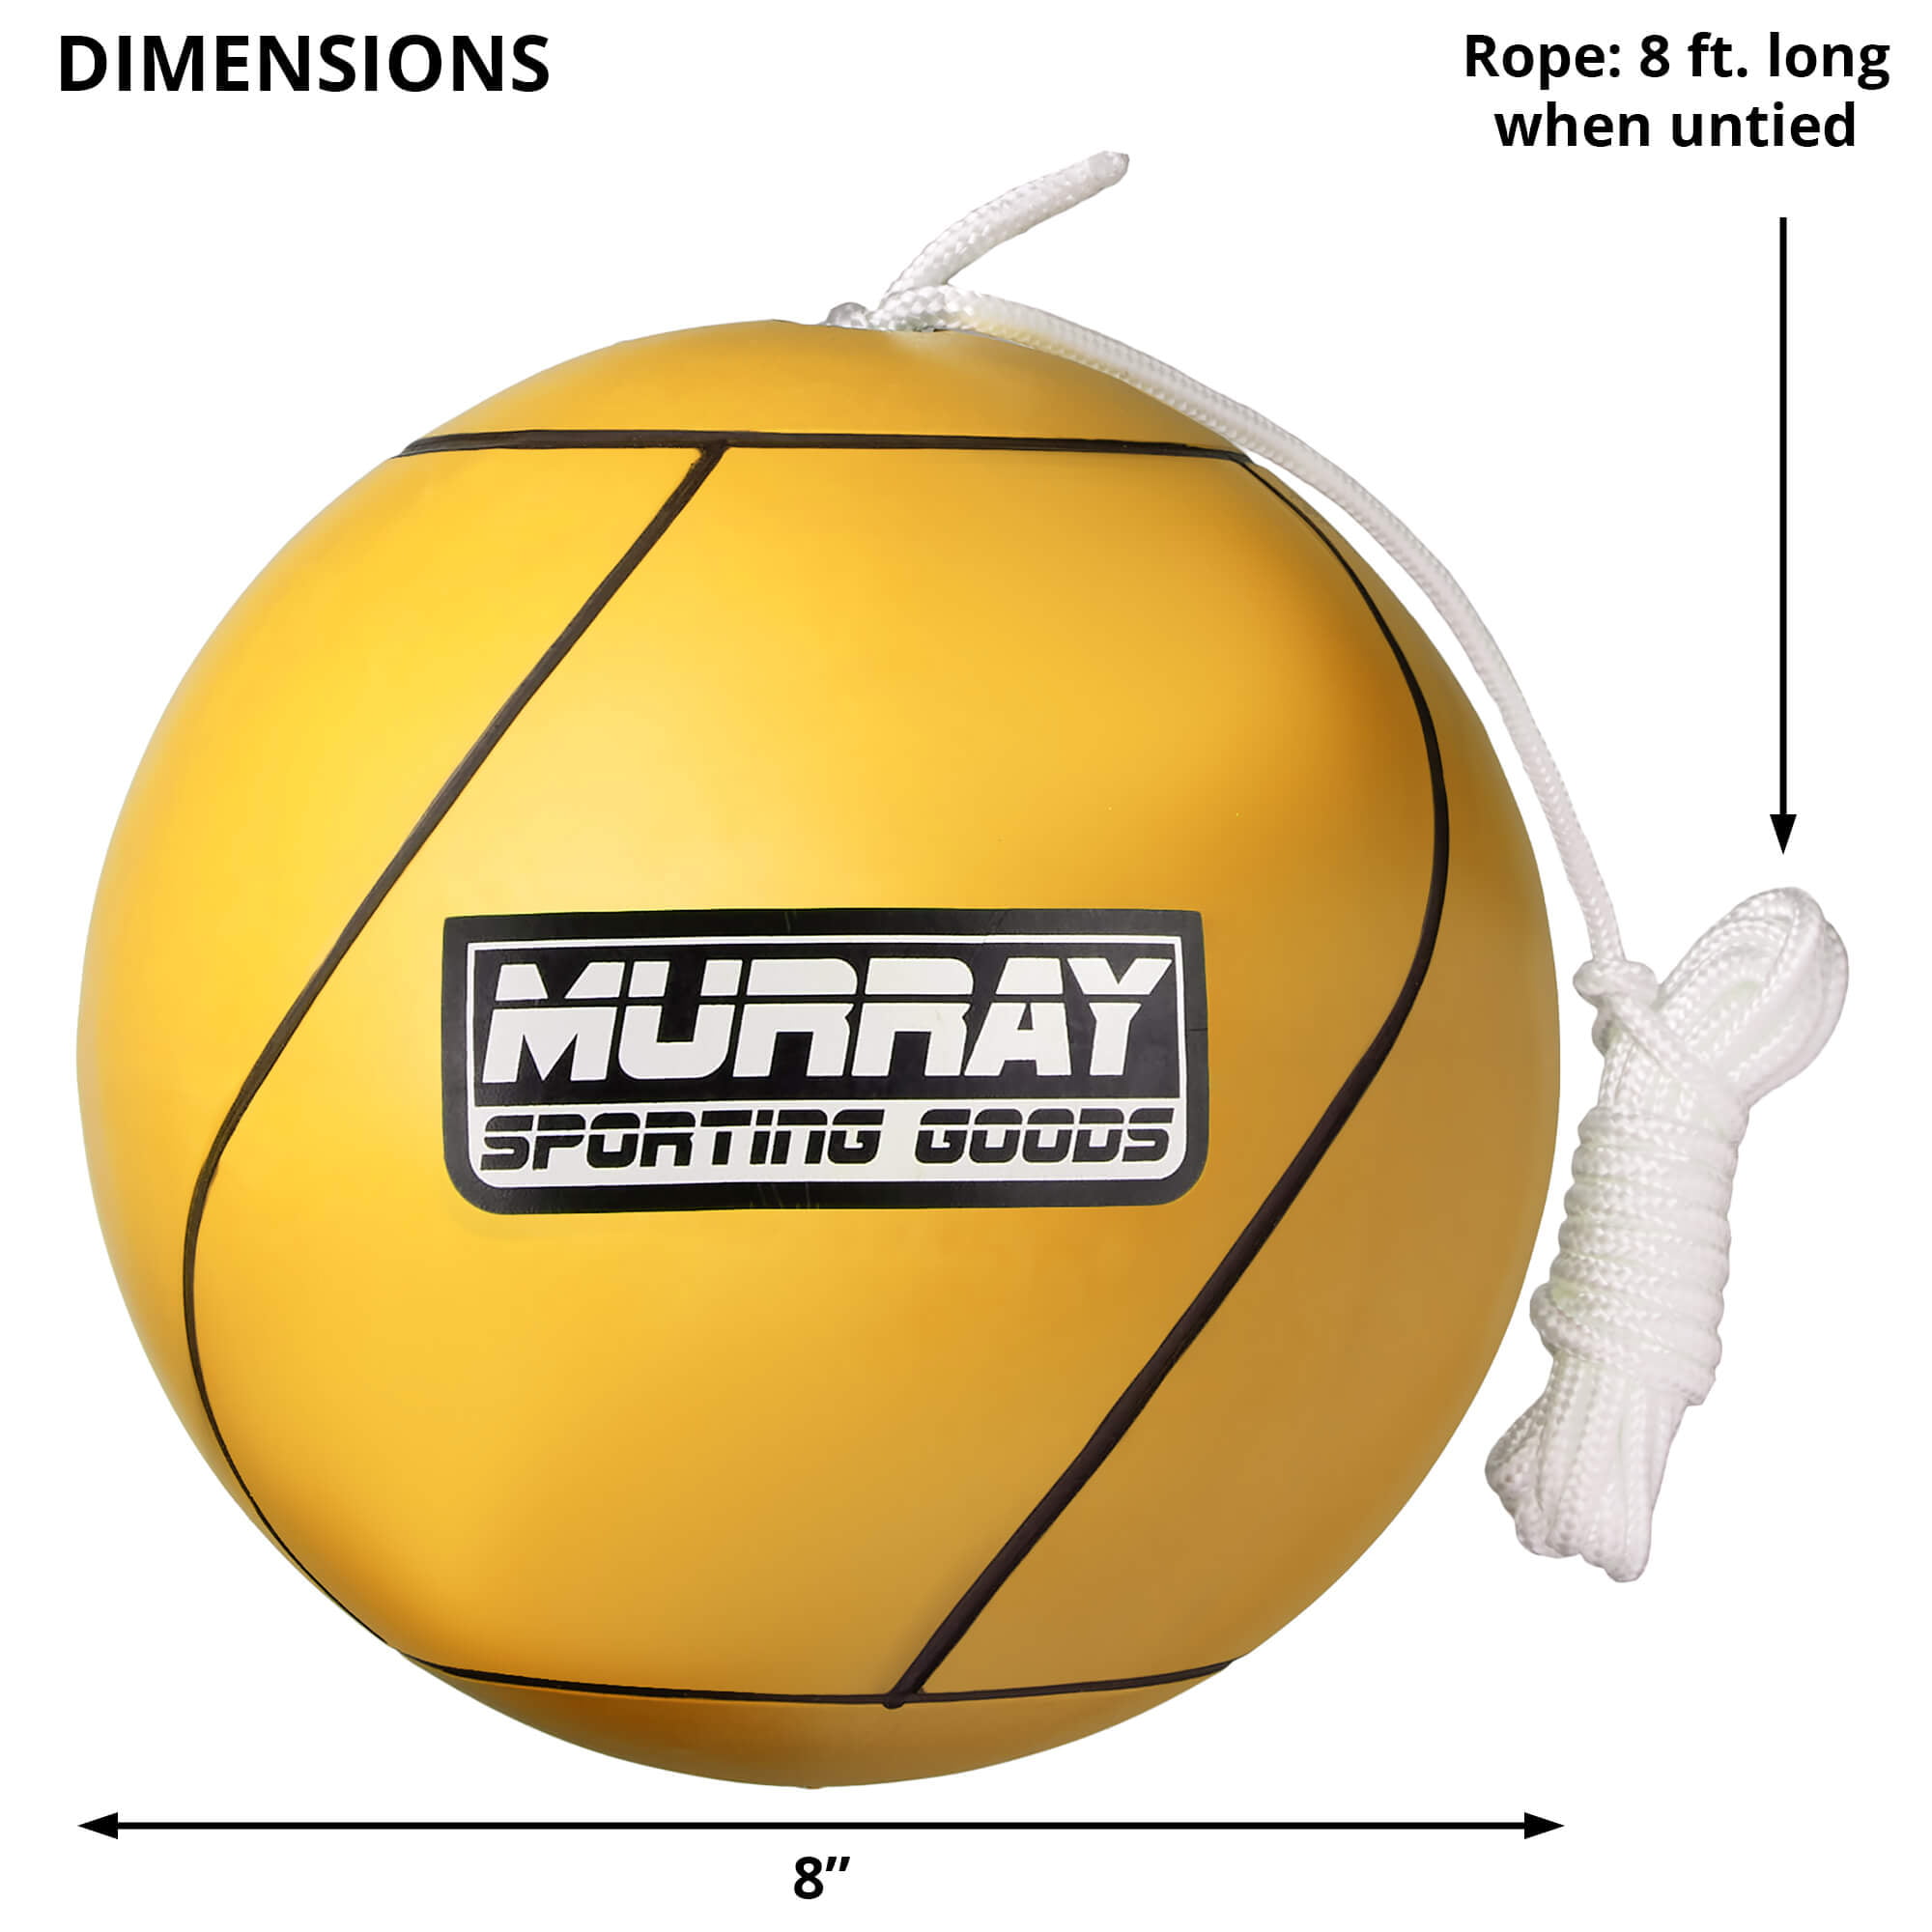 Great Outdoor Game for Adults Green Yellow Murray Sporting Goods Tetherball and Rope Red Full-Size Soft Rubber Portable Tetherballs with Rope Blue or Black Kids or Dogs 